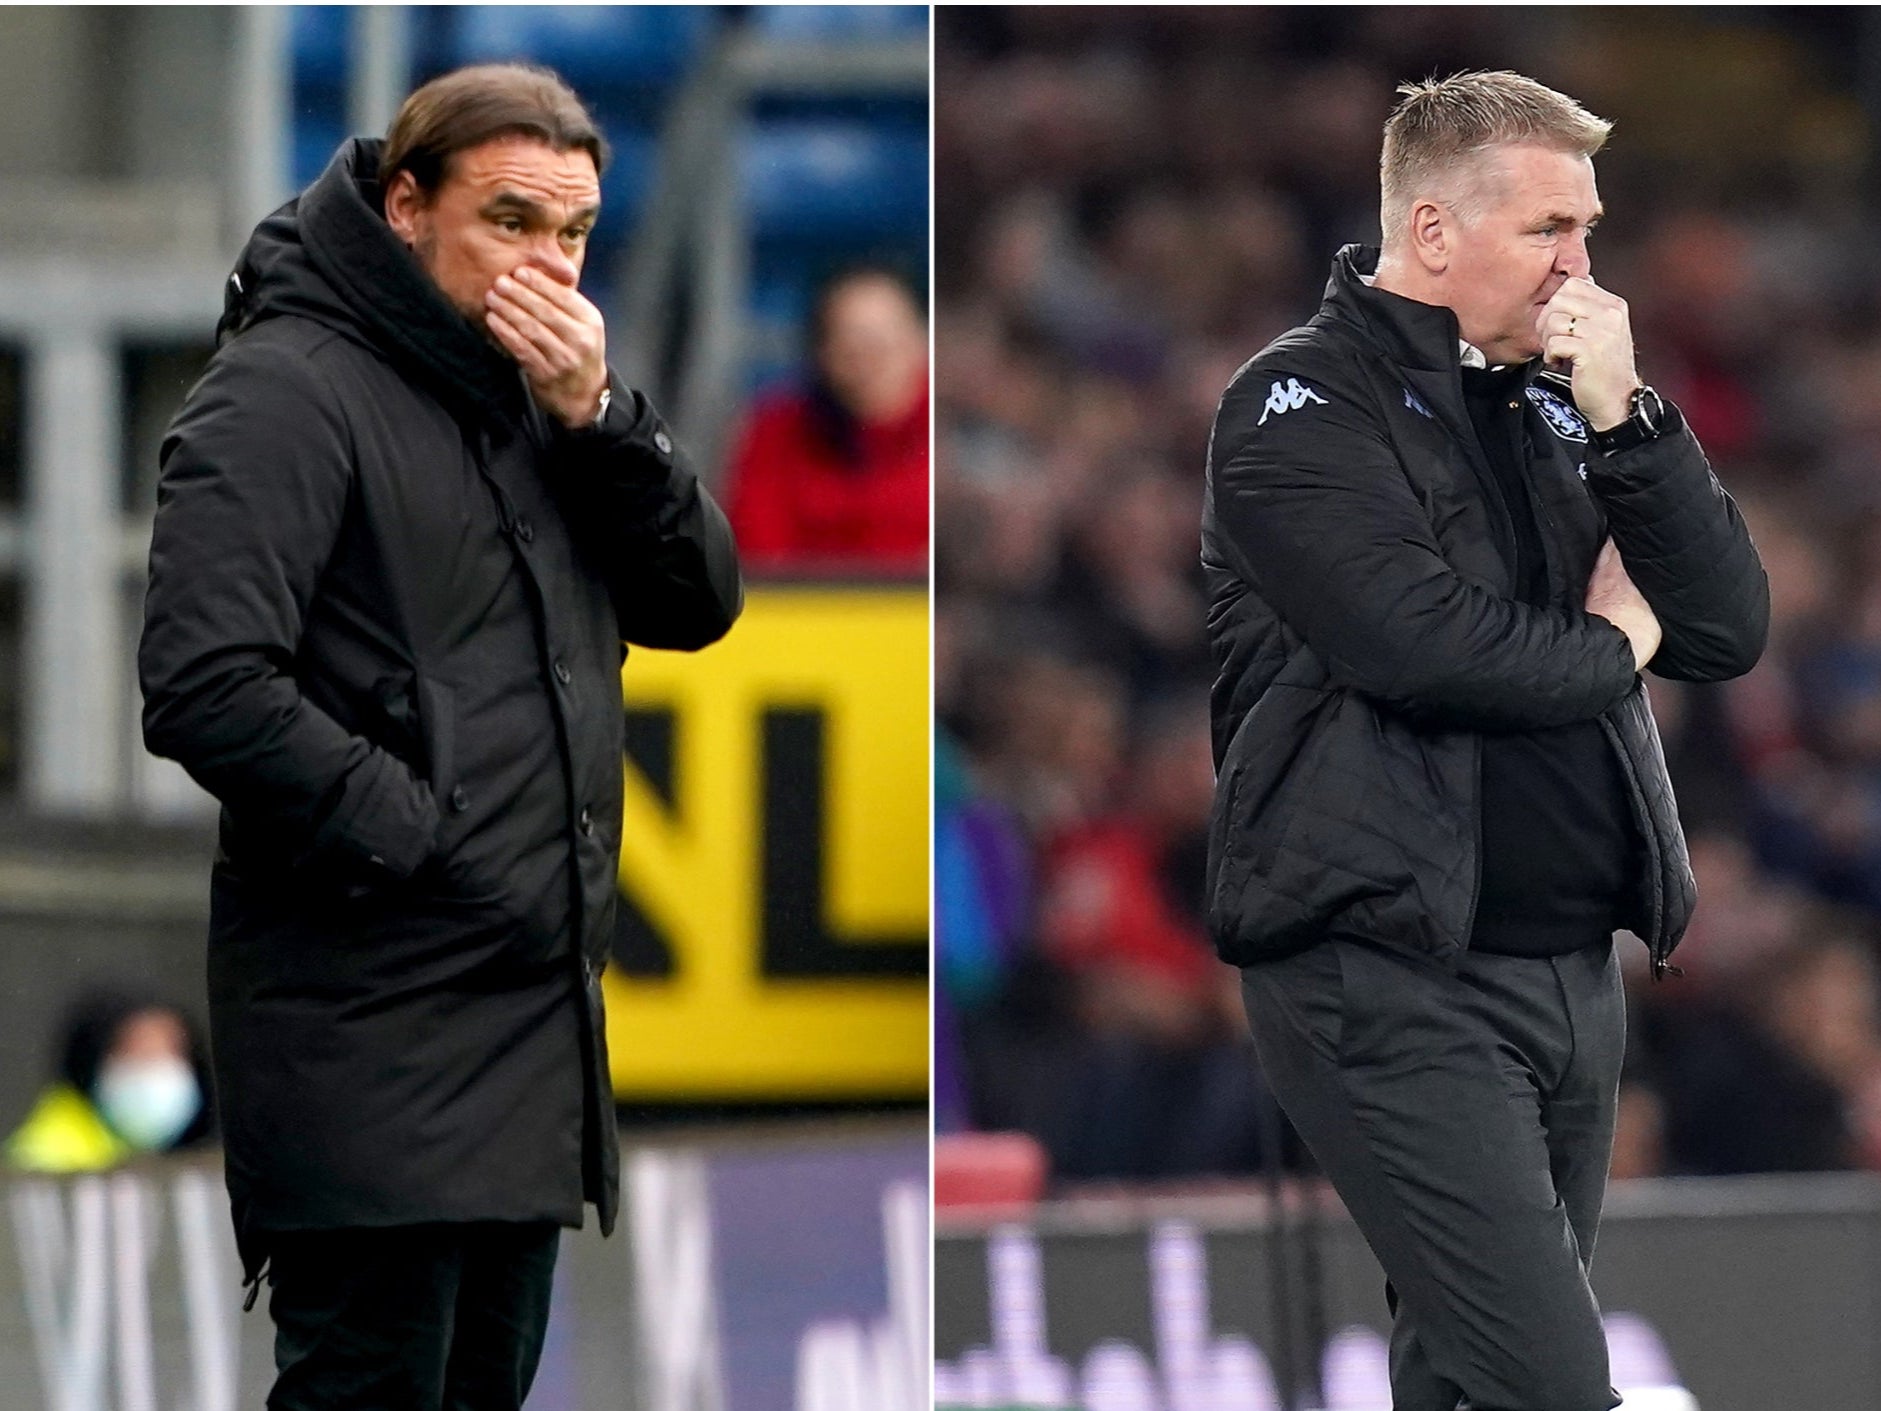 Daniel Farke, left, and Dean Smith were both sacked in recent days